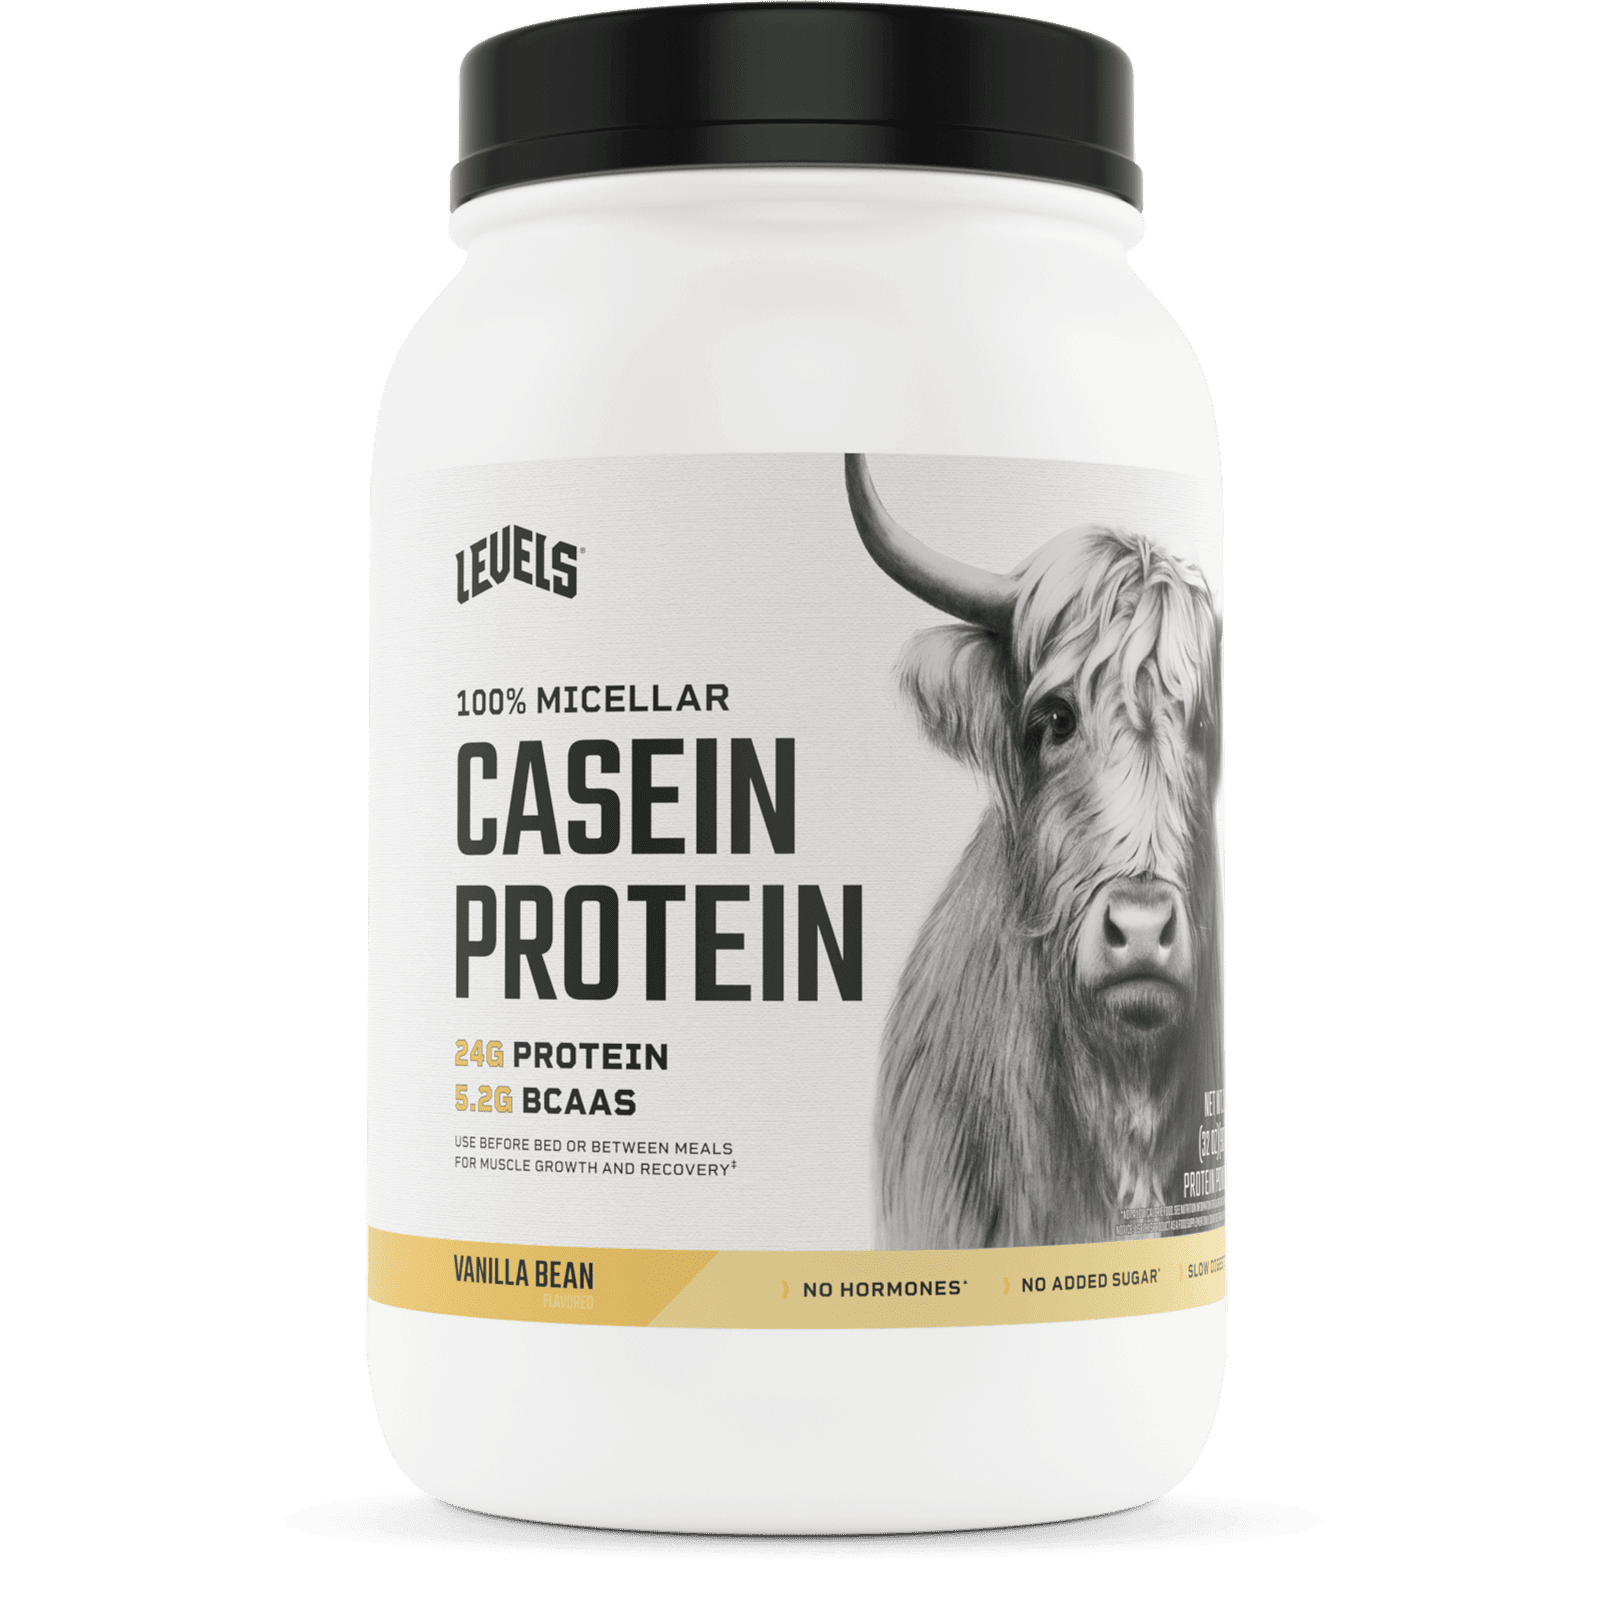 How to characterize protein quality? - Prodiet Fluid - the micellar casein  dedicated to high protein beverage